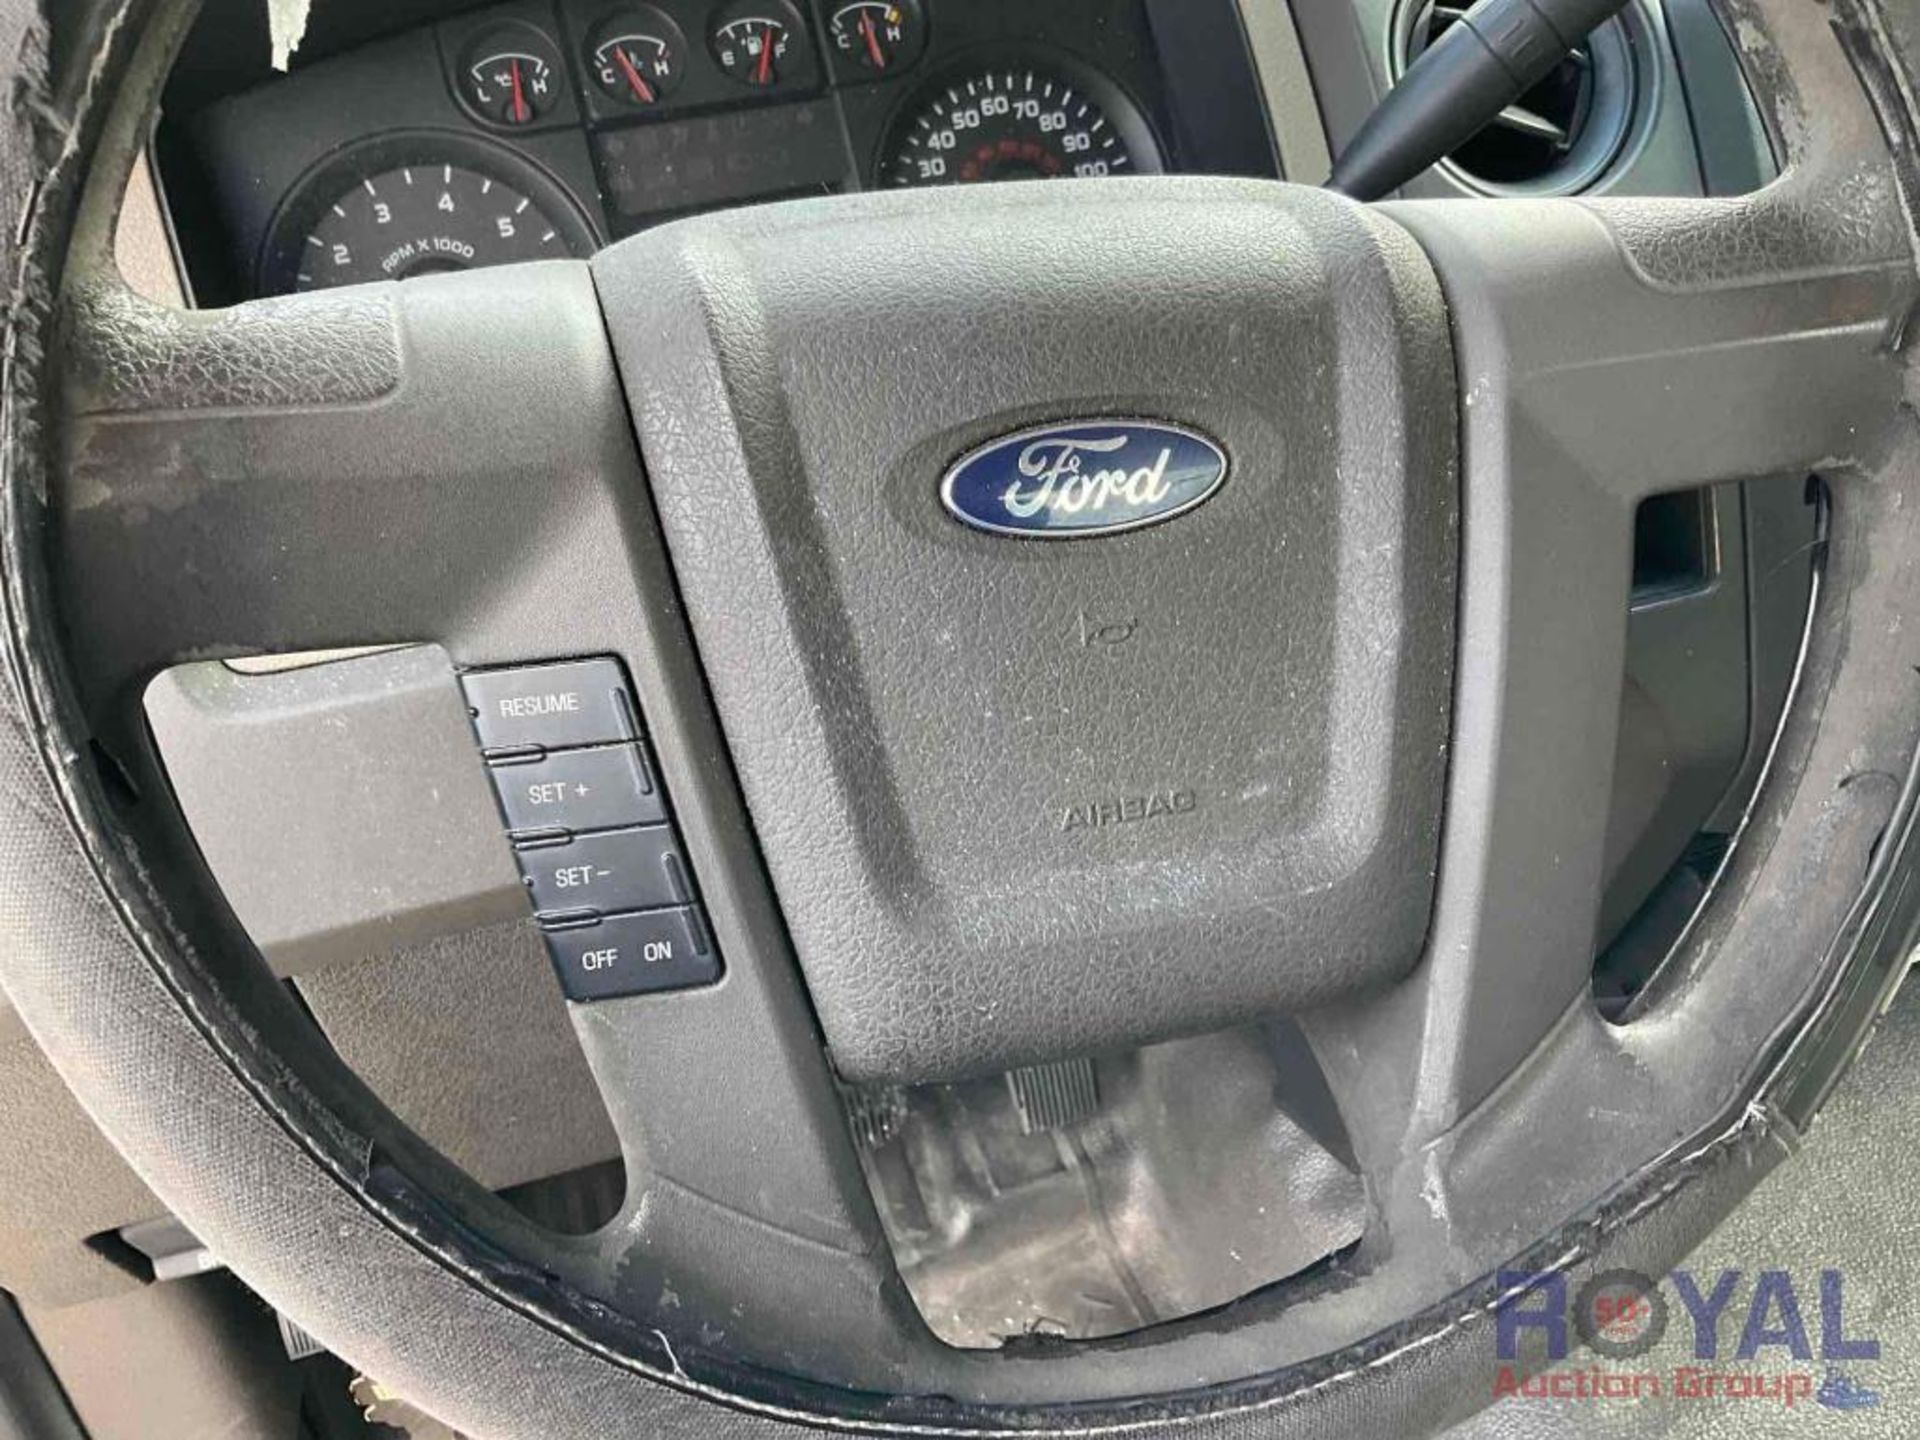 2011 Ford F150 Pickup Truck - Image 12 of 24